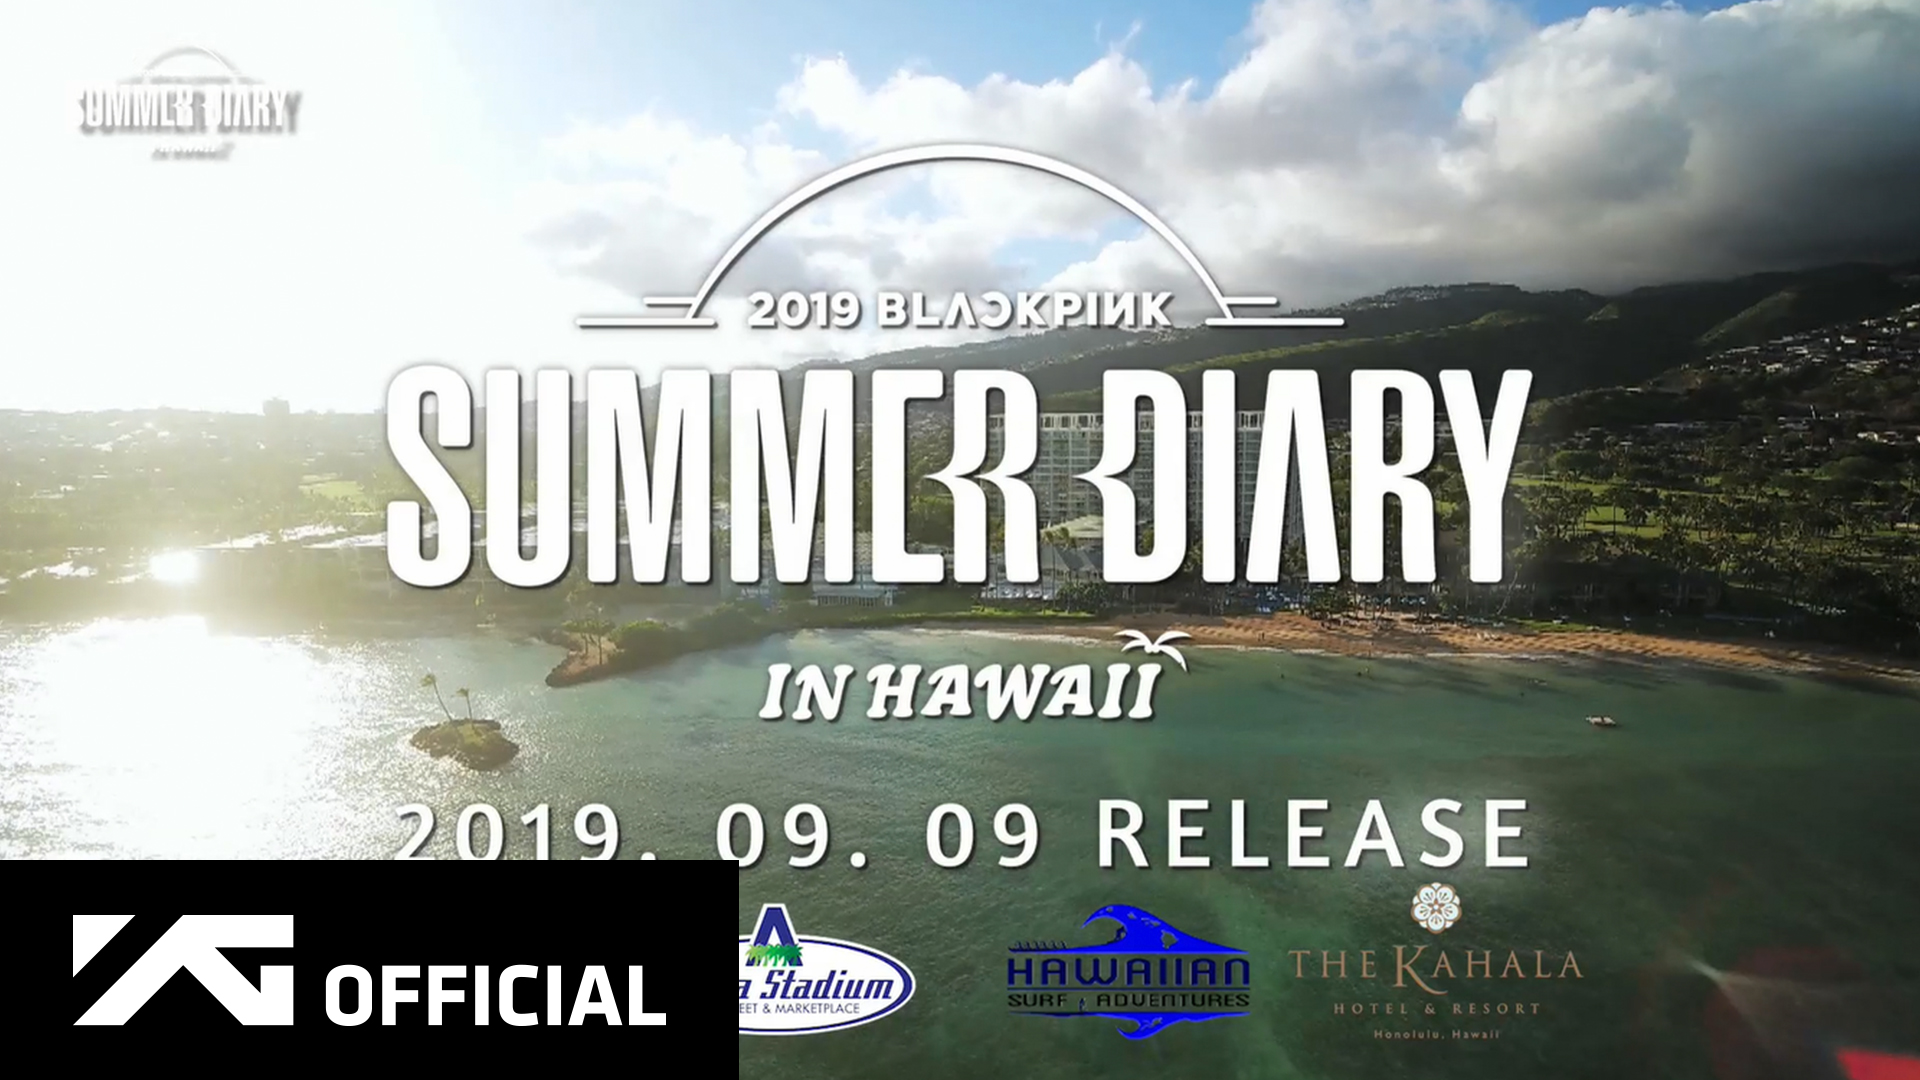 BLACKPINK - 2019 BLACKPINK'S SUMMER DIARY [IN HAWAII] PREVIEW